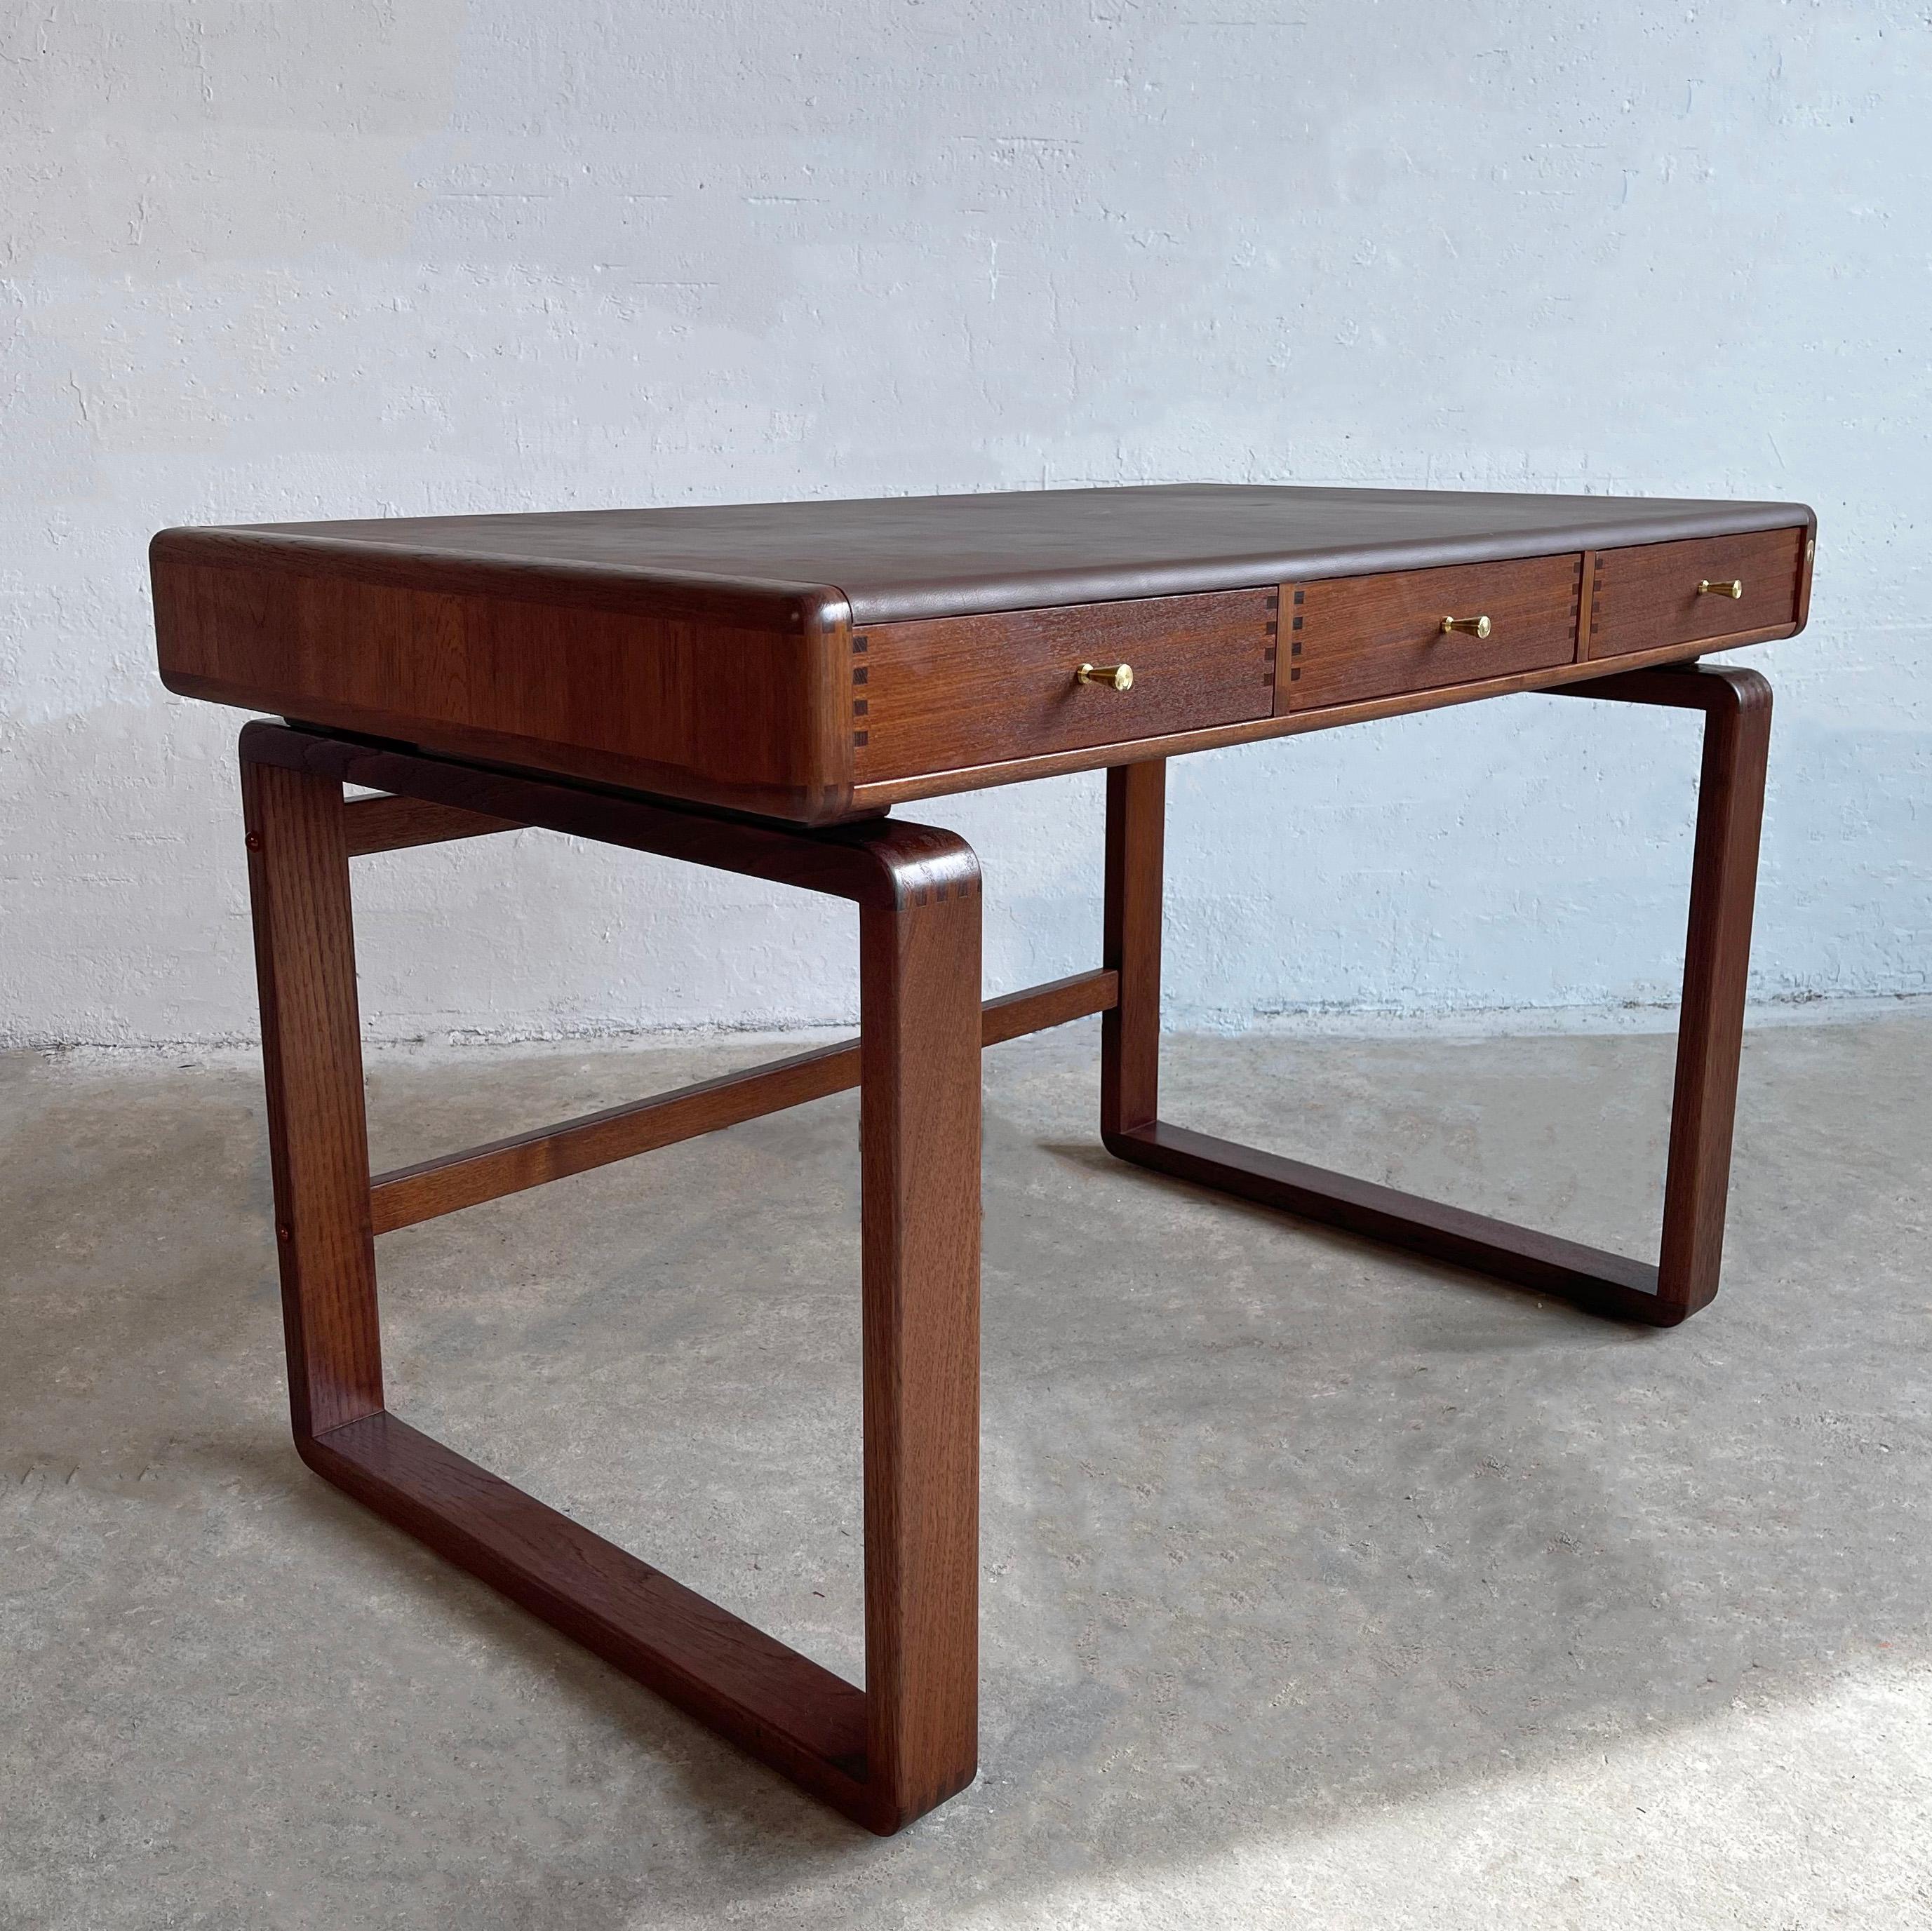 Danish modern, teak desk by D-Scan features a floating top with 3 drawers and a custom brown leather desk surface atop open and airy, bentwood sleigh legs. There are rounded edges throughout with exposed dovetail joinery and brass hardware. The desk